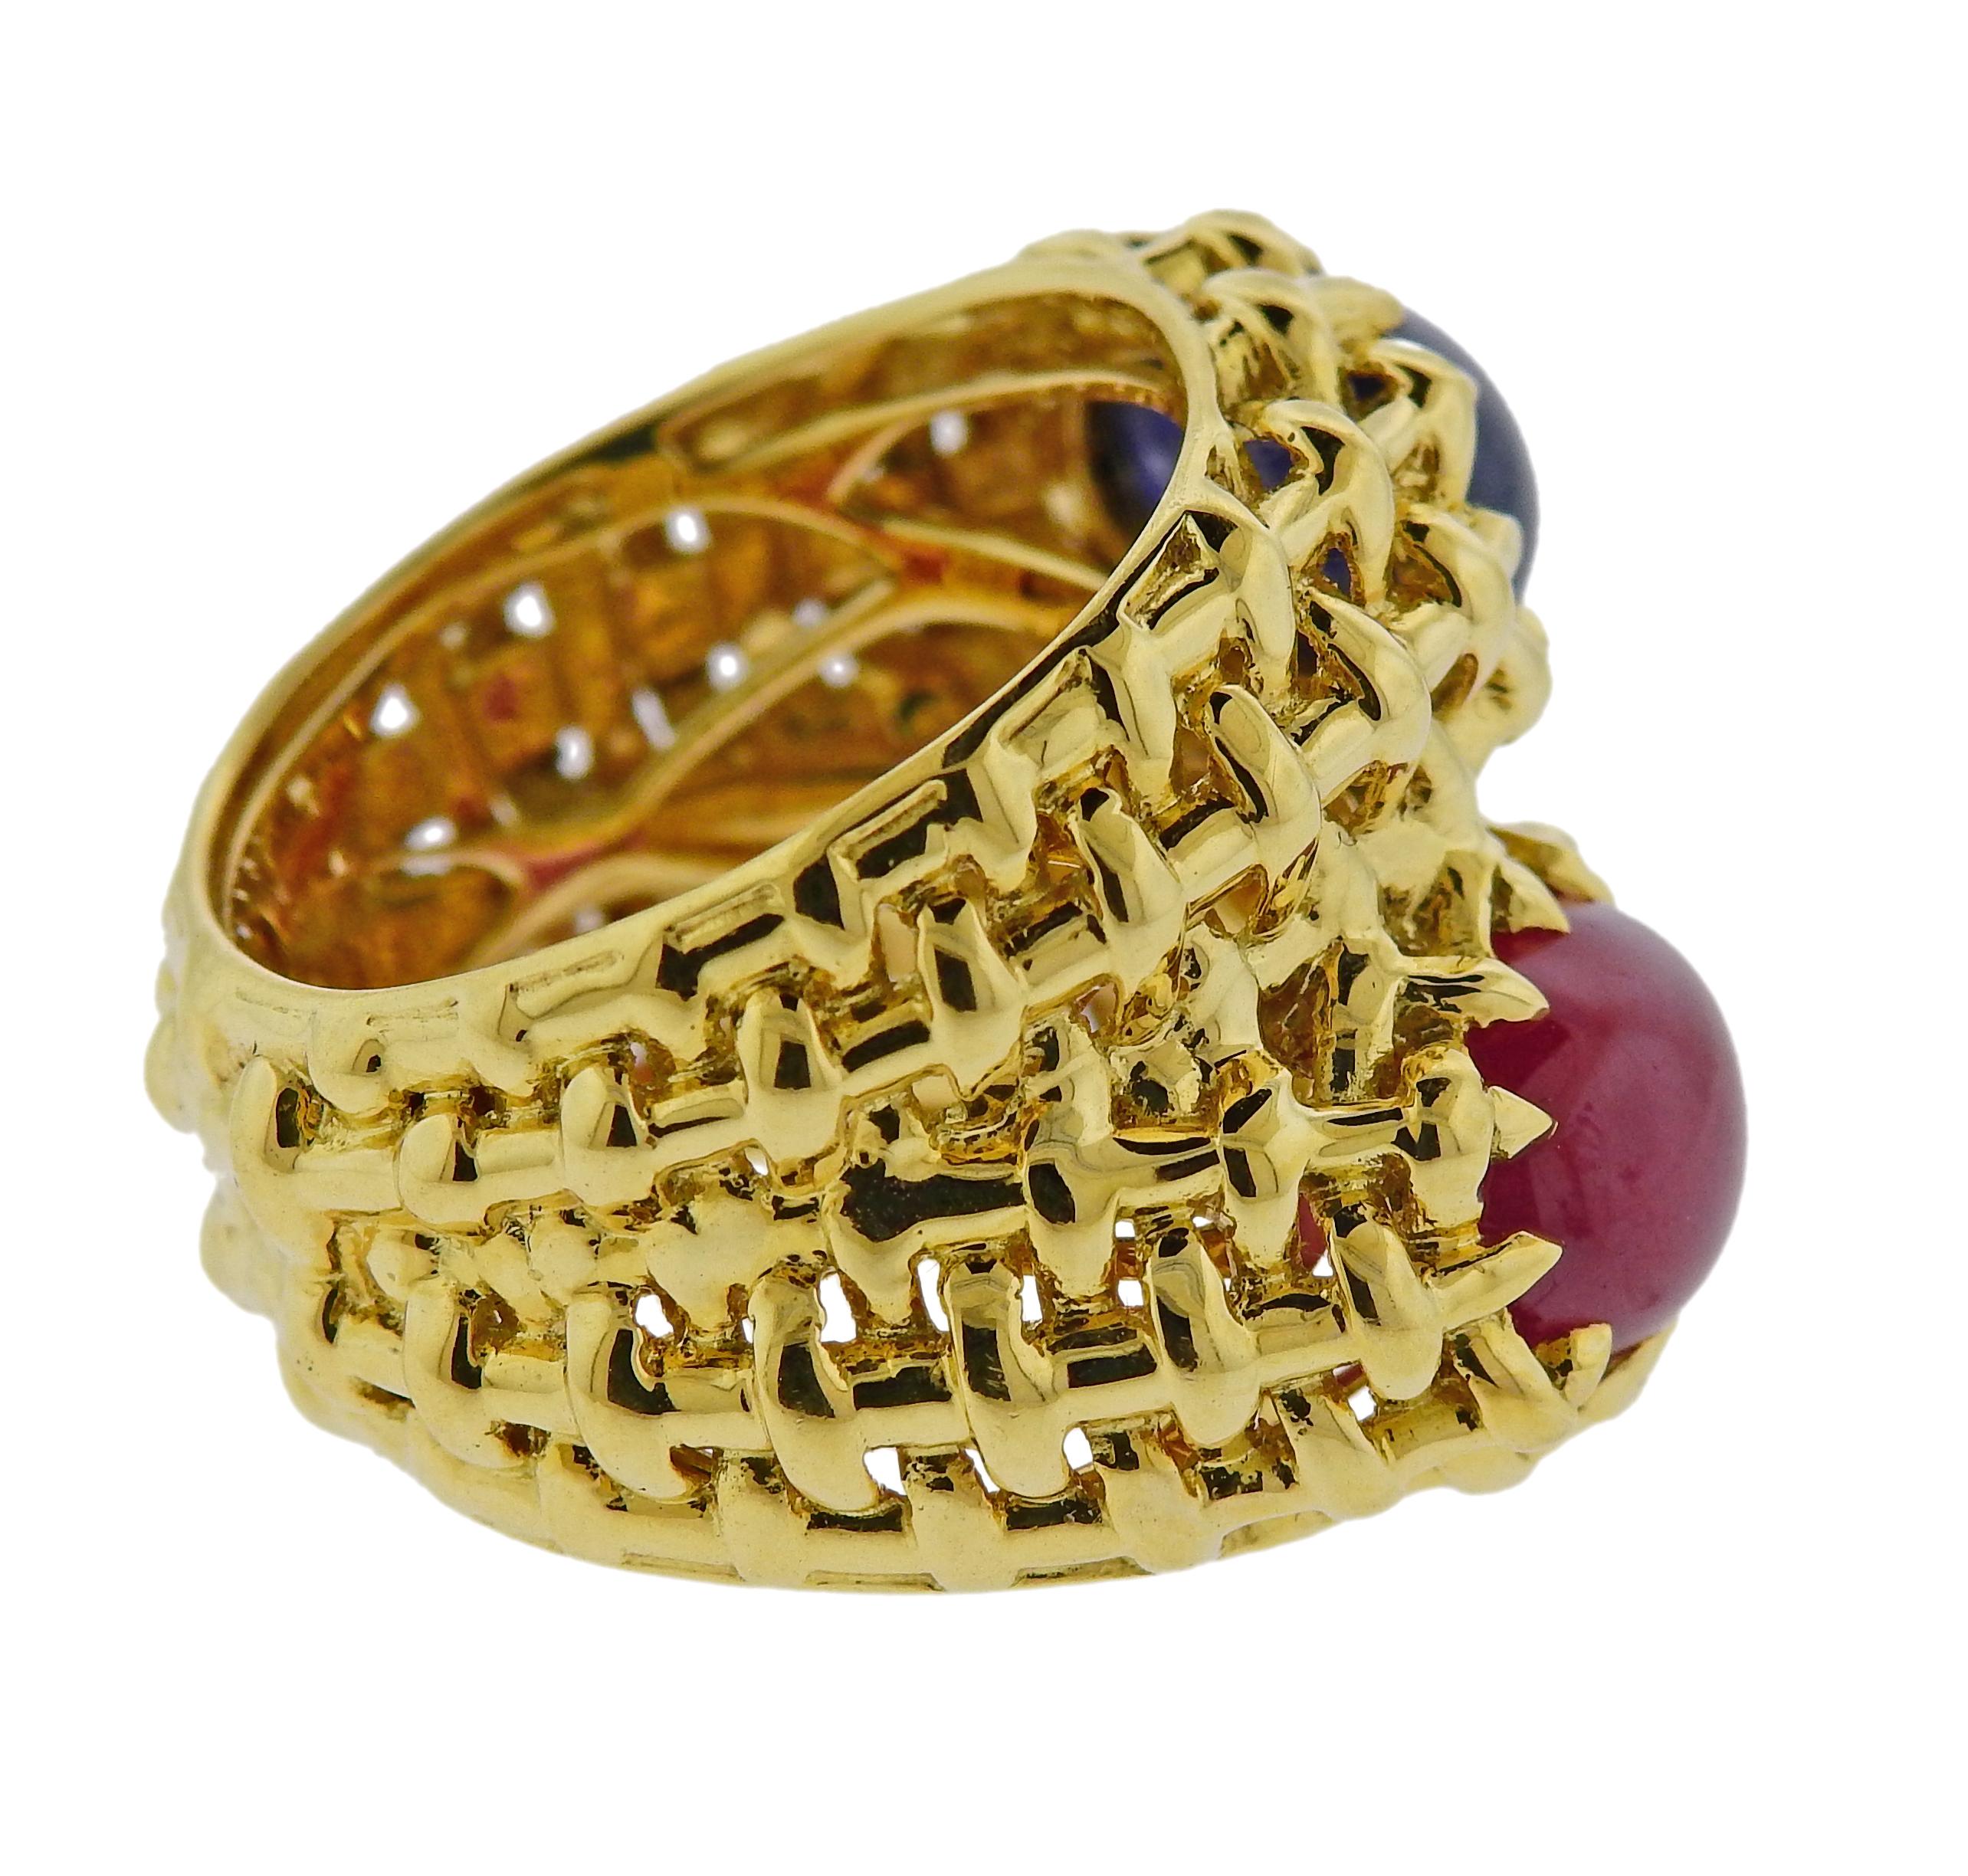 18k yellow god bypass ring by Seaman Schepps, featuring 10.5mm x 7.2mm sapphire and 10.7mm x 7.3mm ruby cabochons. Ring size - 7.5, ring top is 20mm wide, weighs 15.1 grams. Marked: 750, Shell hallmark. 